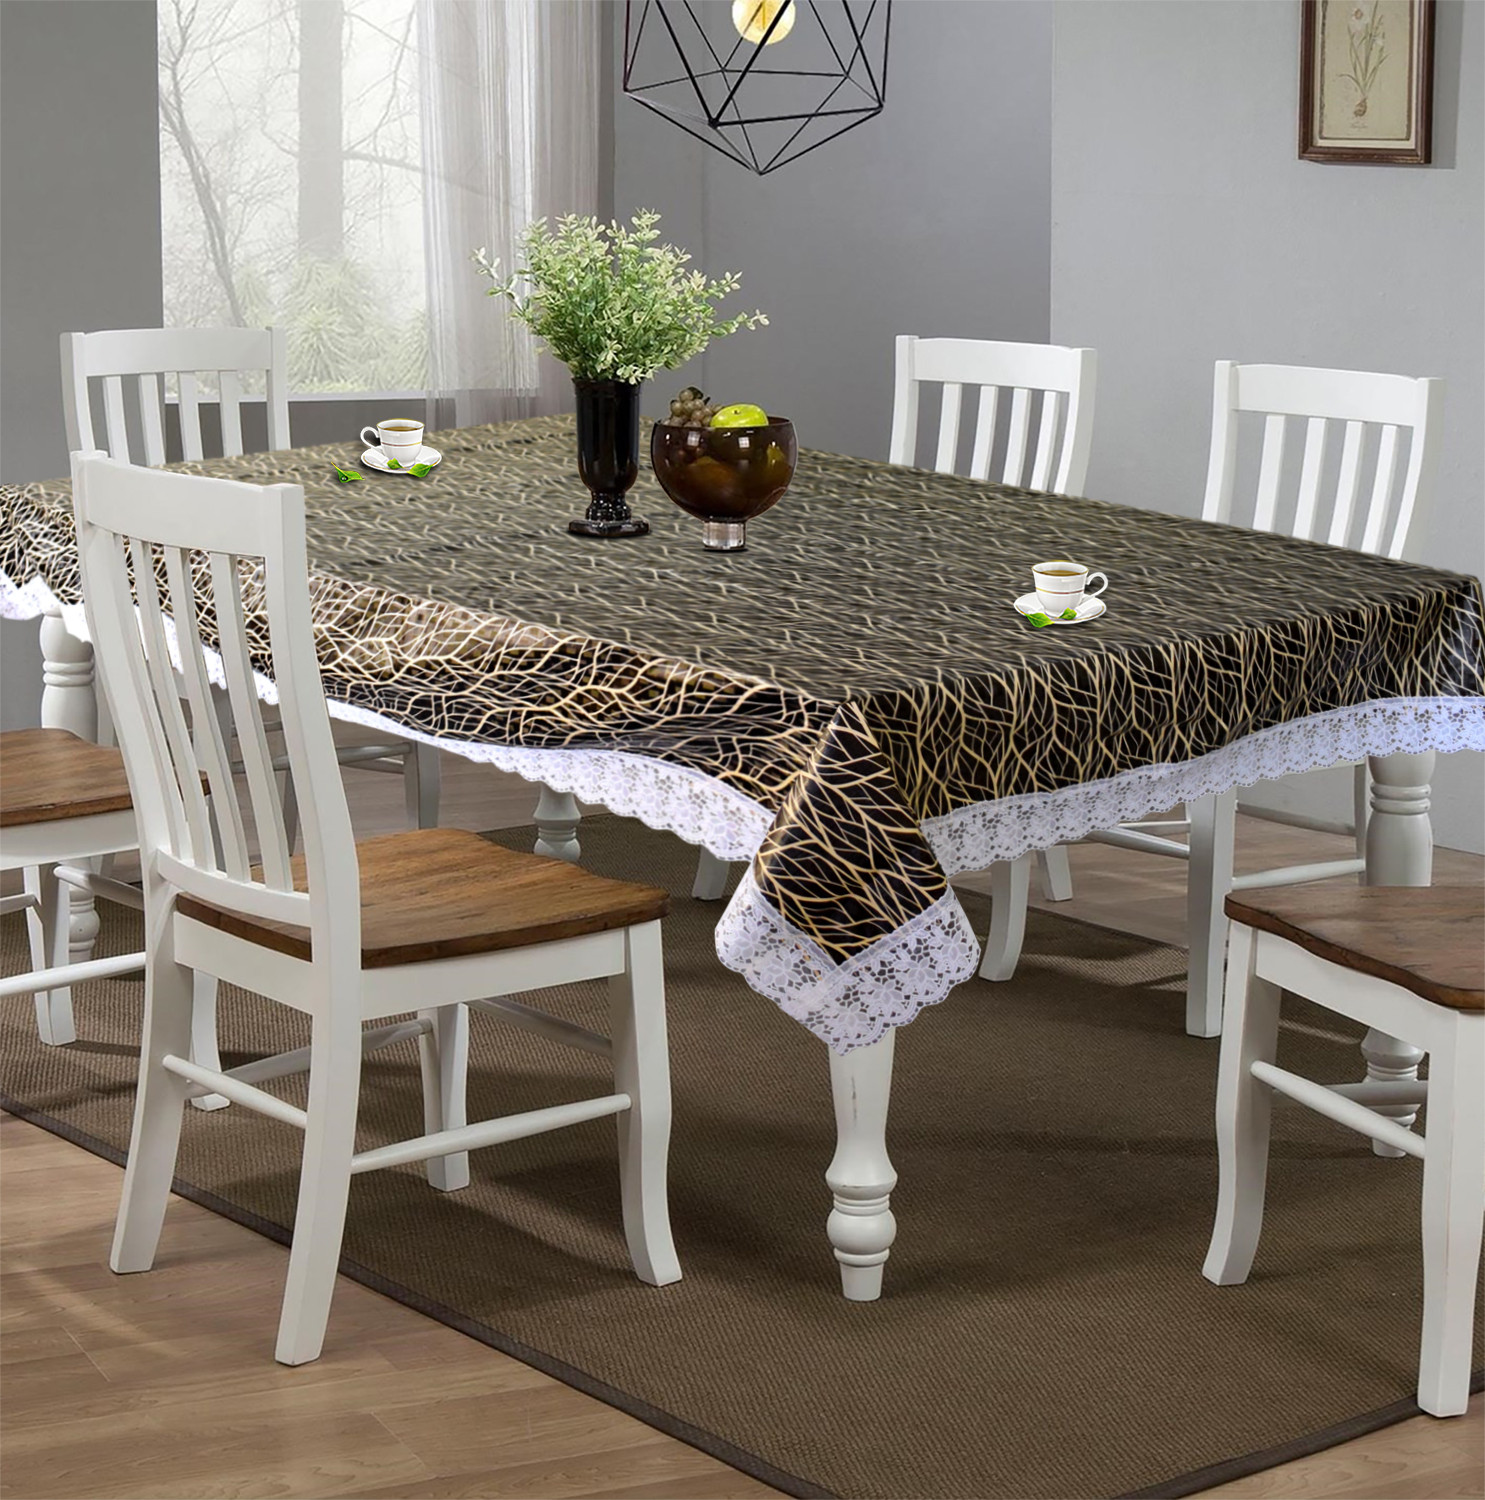 Kuber Industries Tree Printed PVC 6 Seater Dinning Table Cover, Protector With White Lace Border, 60